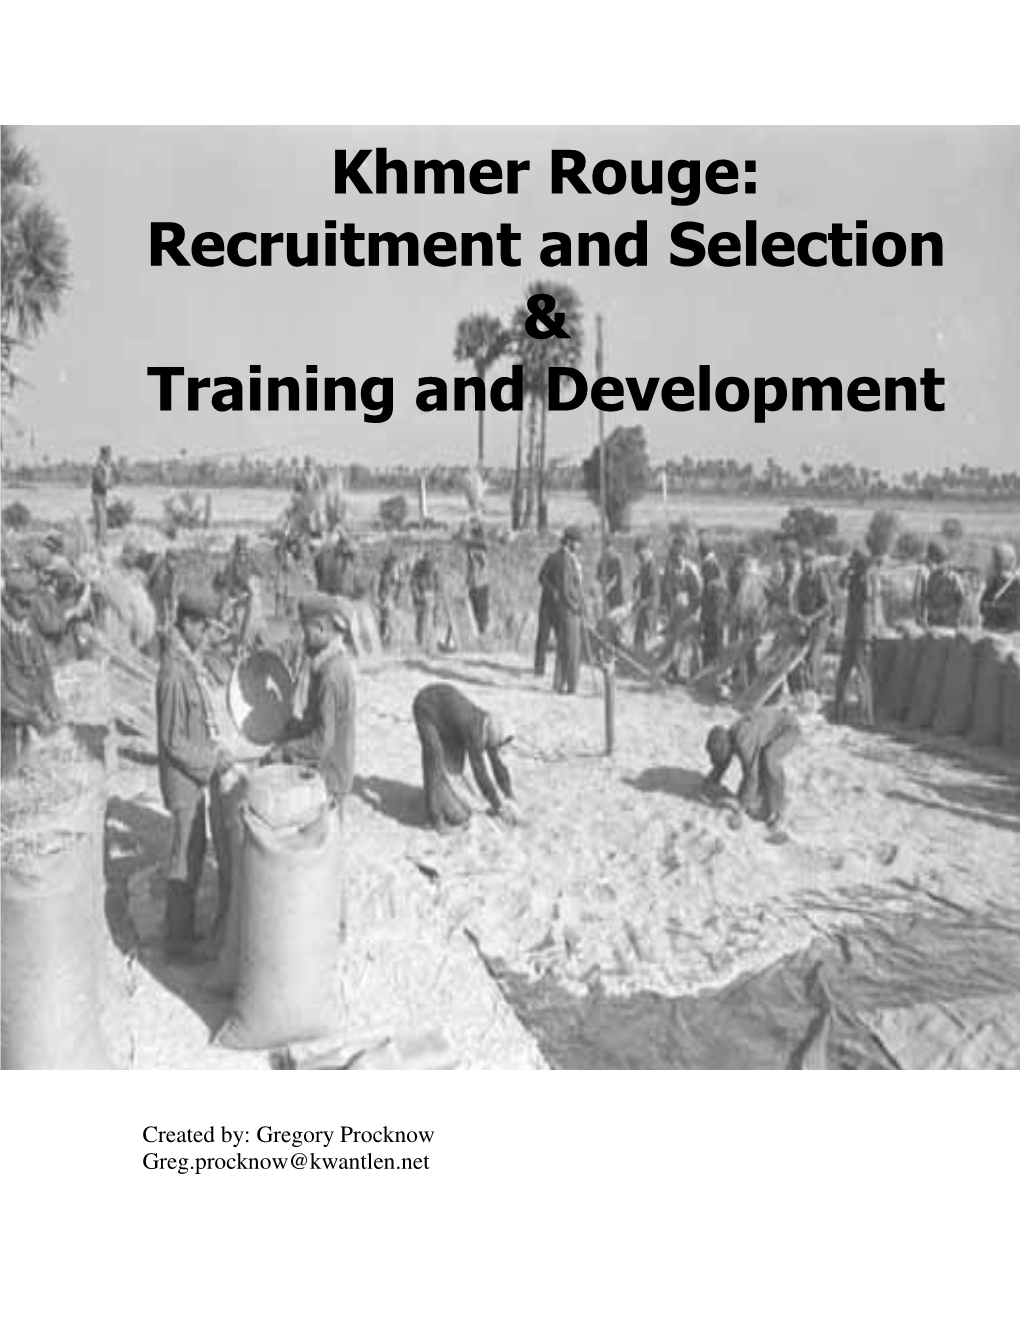 Khmer Rouge: Recruitment and Selection & Training and Development